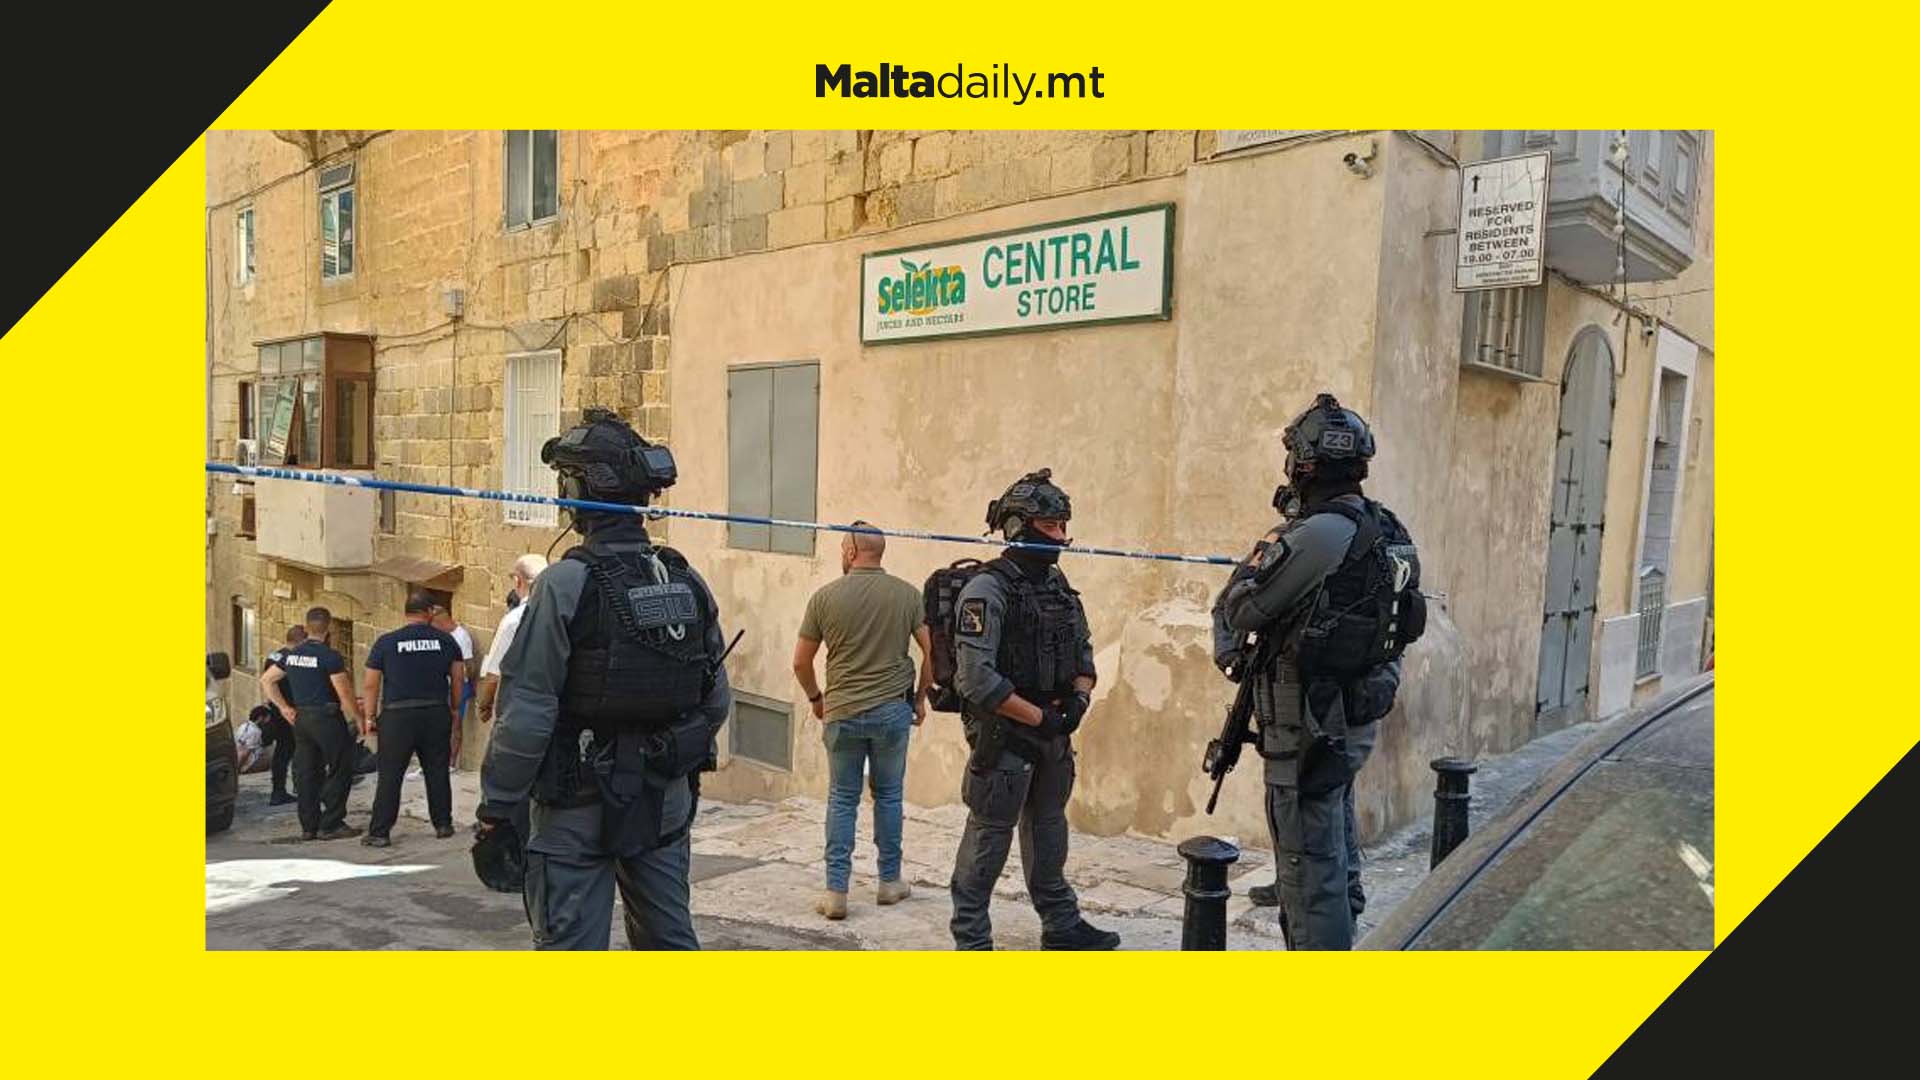 7 people arrested during Valletta raid by police